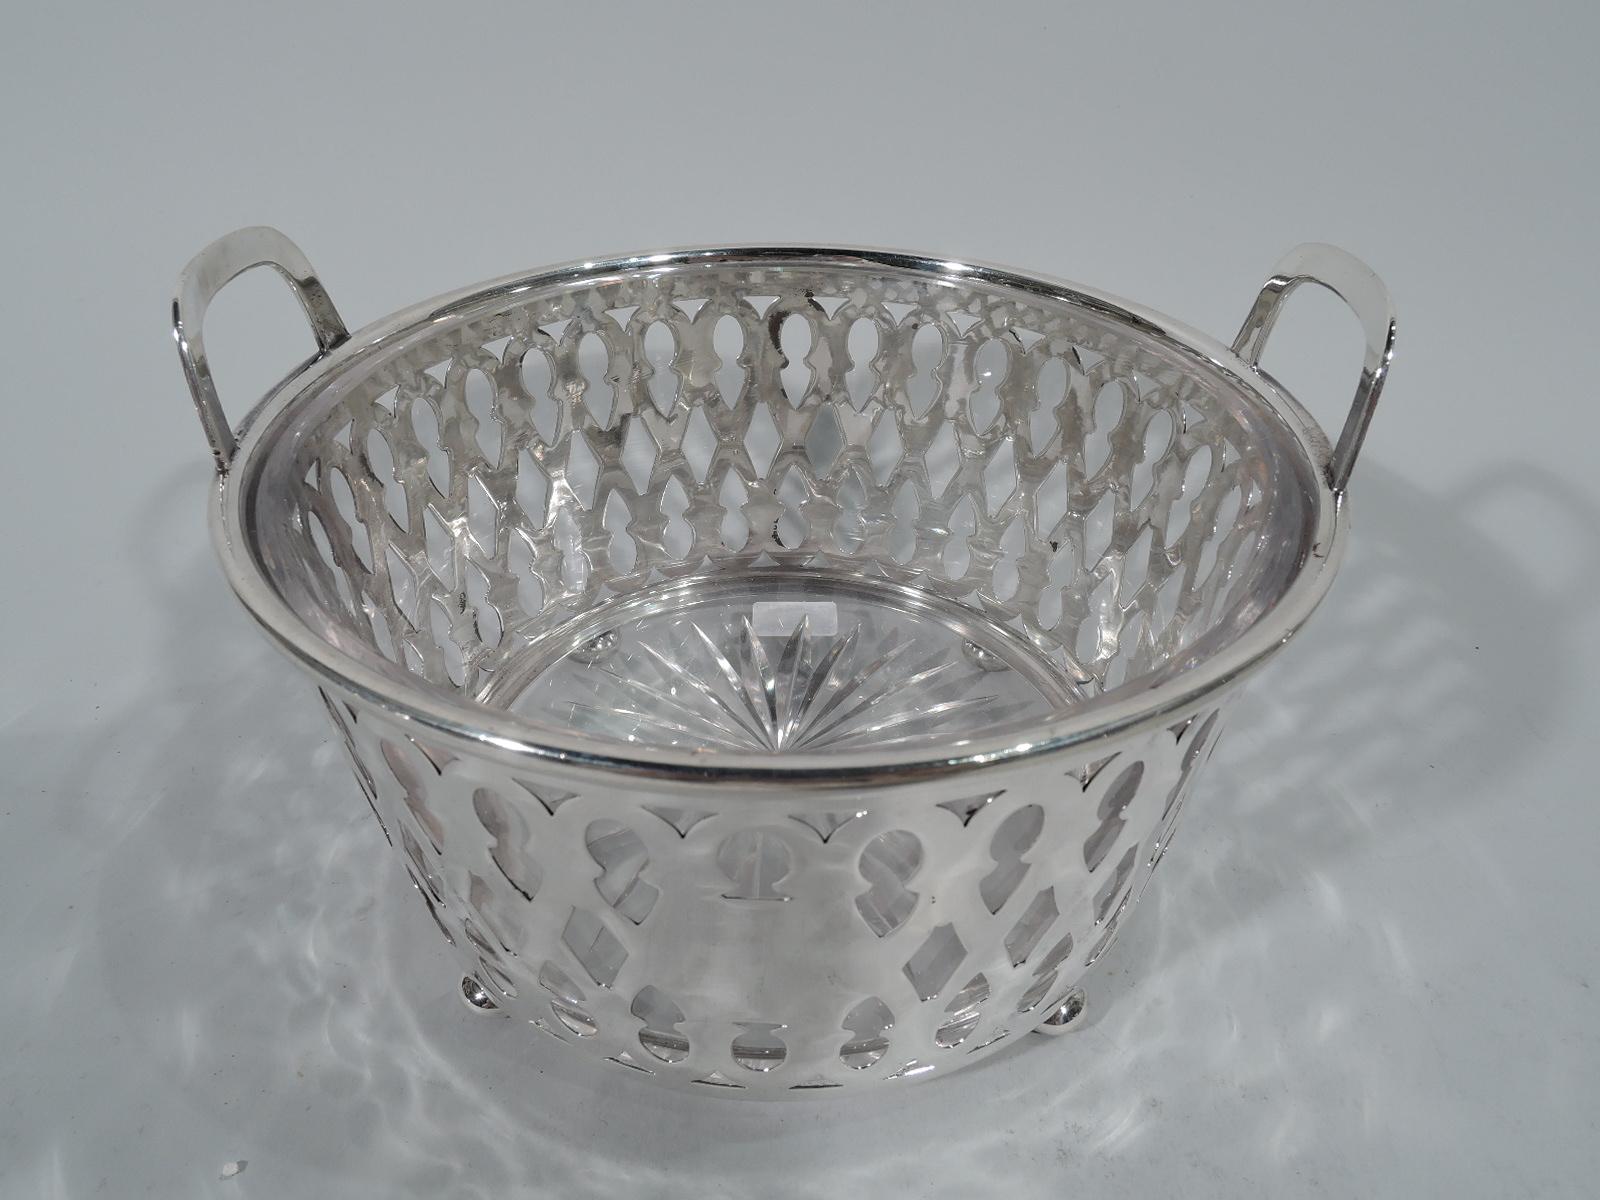 Edwardian sterling silver ice bucket. Made by Tiffany & Co. in New York. Straight and tapering sides with open bottom, four ball supports, and two bracket handles mounted to rim. Sides have repeating figure-eight motif with keyhole-style piercing.